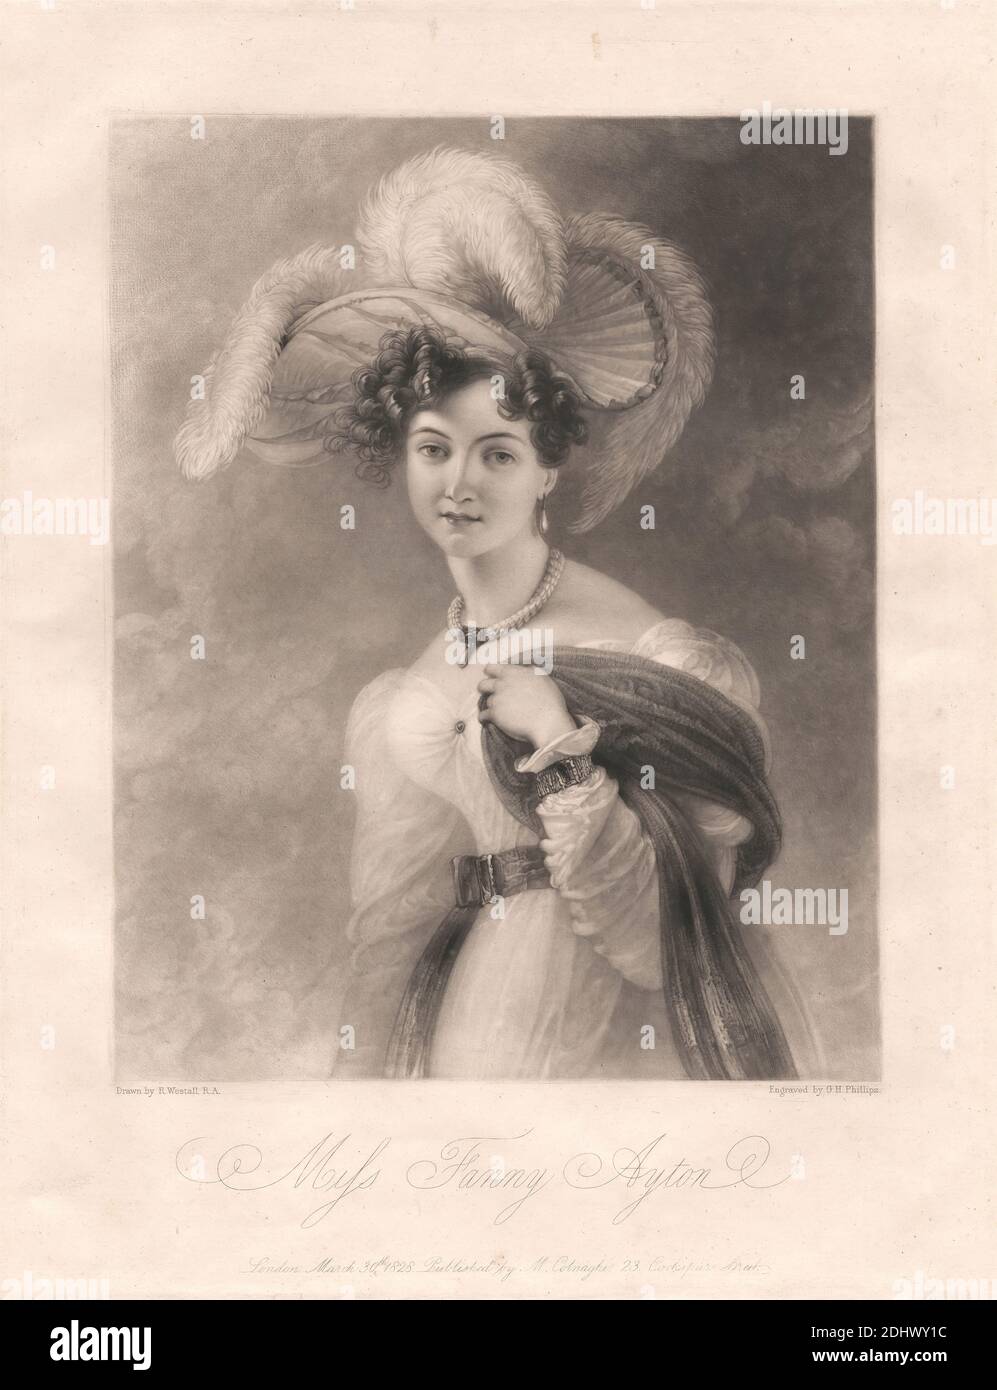 Miss Fanny Ayton, Print made by George H. Phillips, active 1819–1825, British, after Richard Westall, 1765–1836, British, Published by Colnaghi, established 1760, active ca. 1785–1911, Italian, active in Britain, 1828, Mezzotint on medium, moderately textured, cream laid paper, Sheet: 13 × 10 inches (33 × 25.4 cm) and Image: 9 1/2 × 7 9/16 inches (24.1 × 19.2 cm Stock Photo